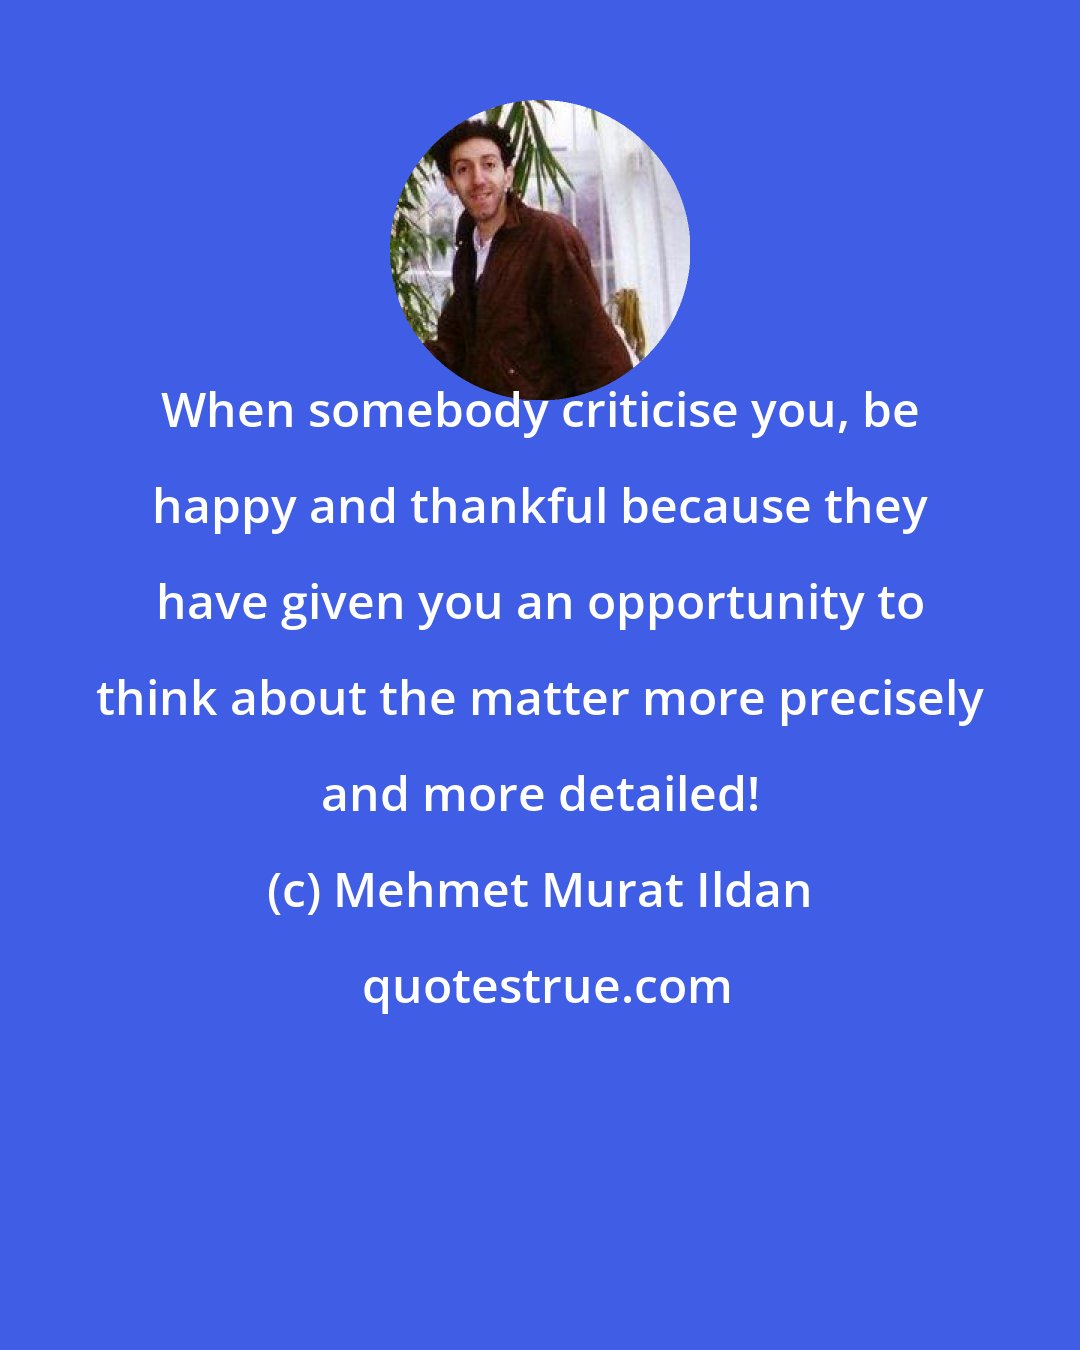 Mehmet Murat Ildan: When somebody criticise you, be happy and thankful because they have given you an opportunity to think about the matter more precisely and more detailed!